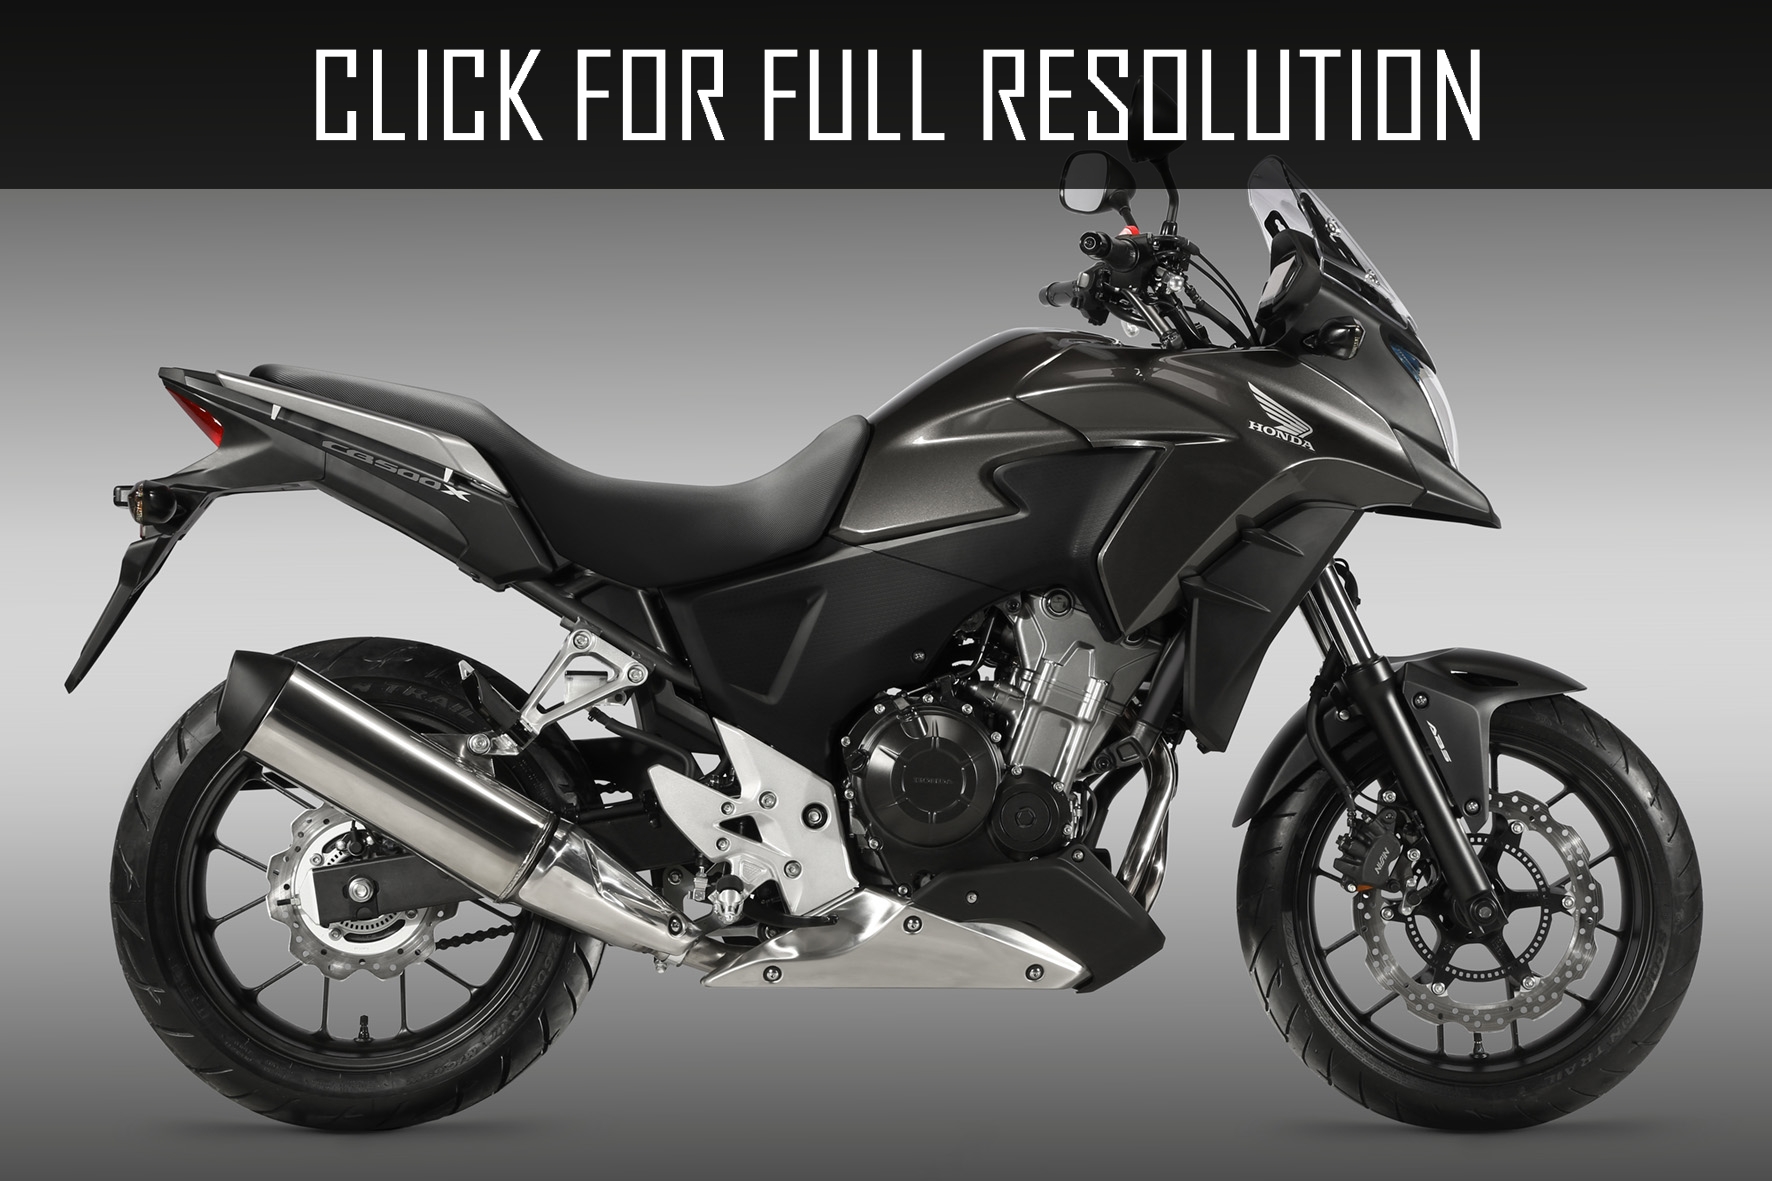 Honda Cb 500 X amazing photo gallery, some information and